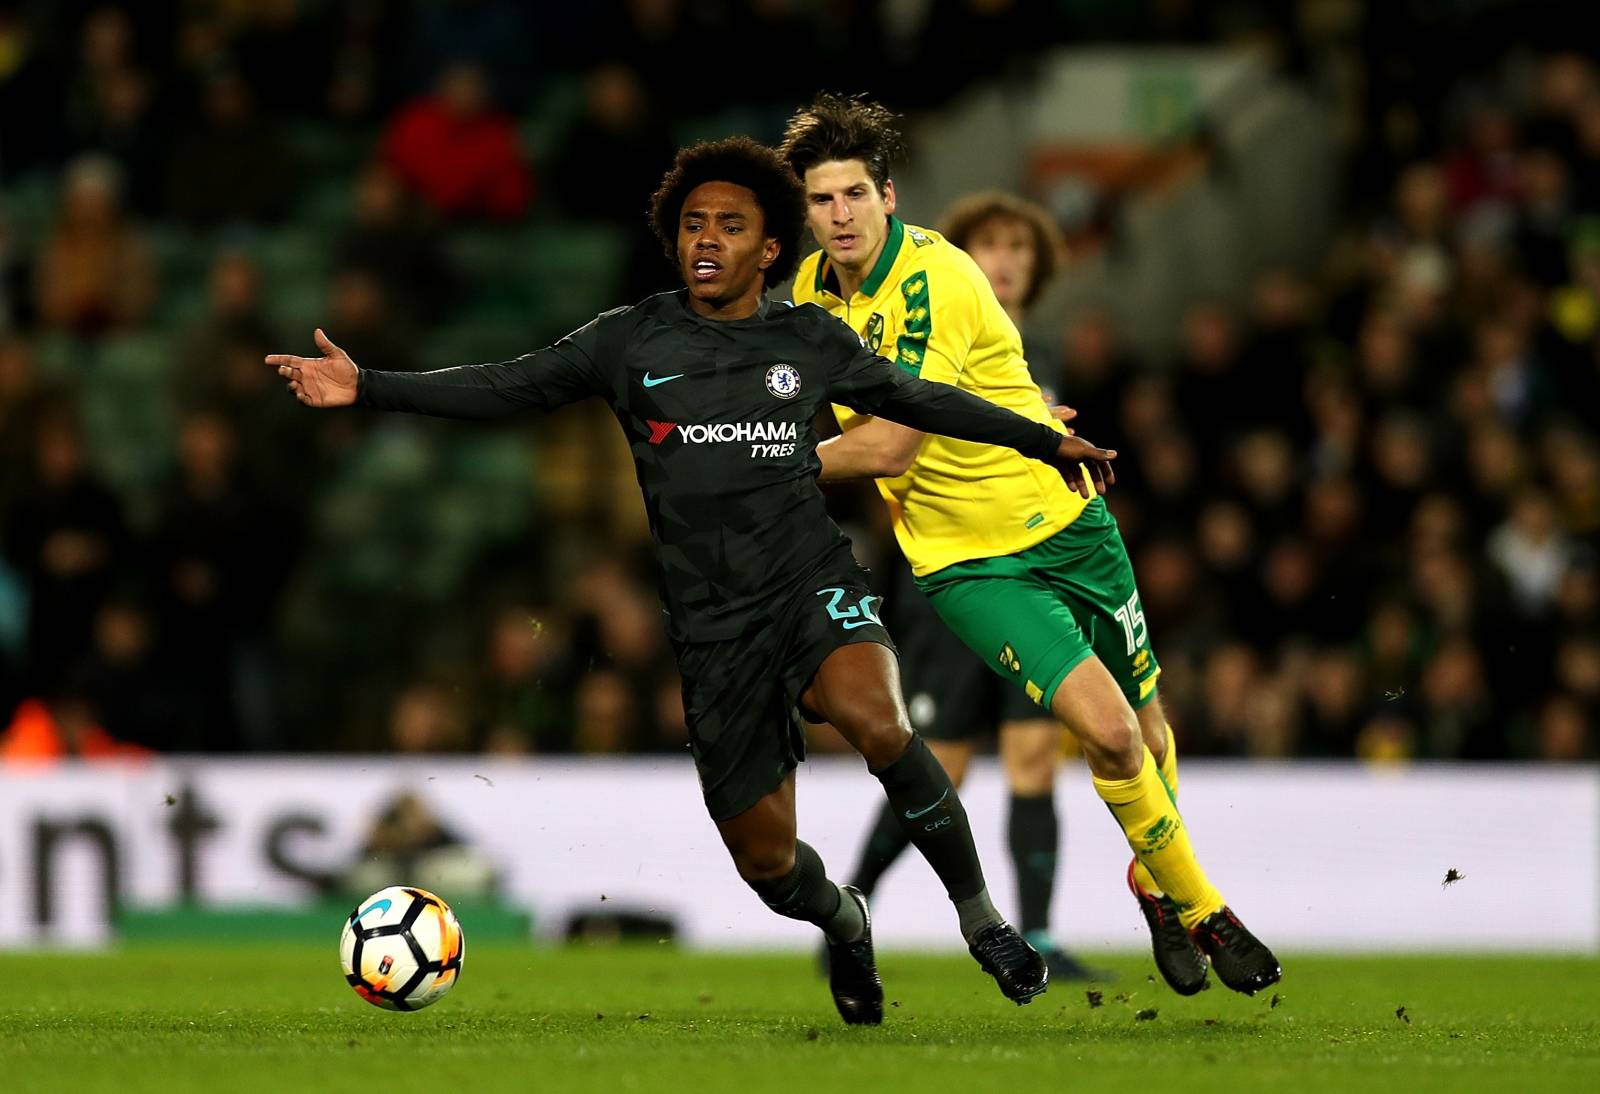 Norwich City v Chelsea - Emirates FA Cup - Third Round - Carrow Road